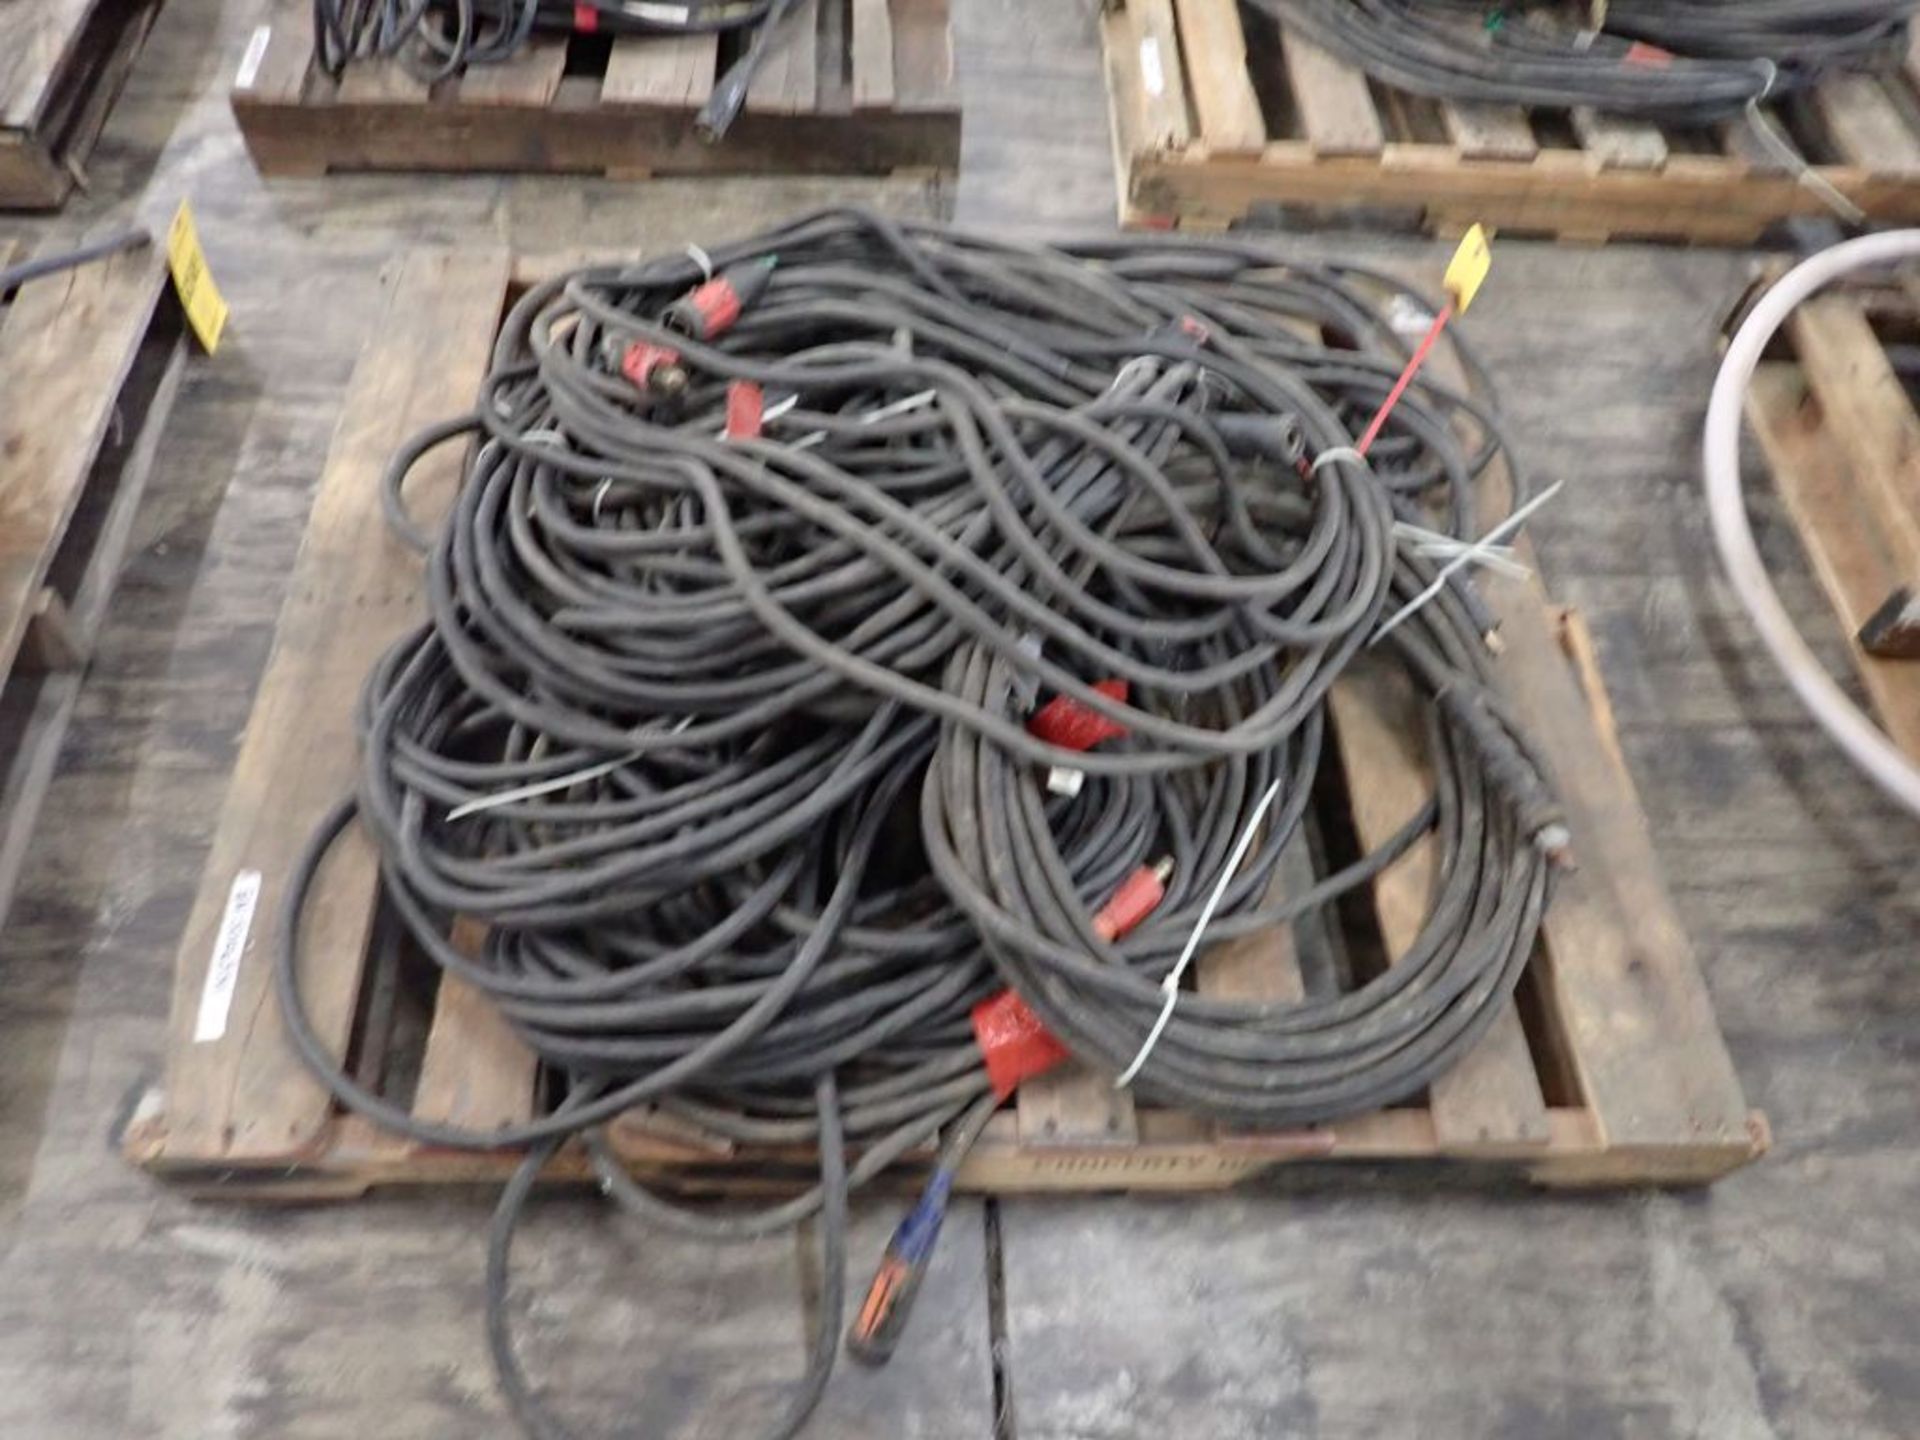 Lot of Assorted Welding Leads w/Connectors|270 lbs Including Pallet; Tag: 225282 - Image 3 of 13